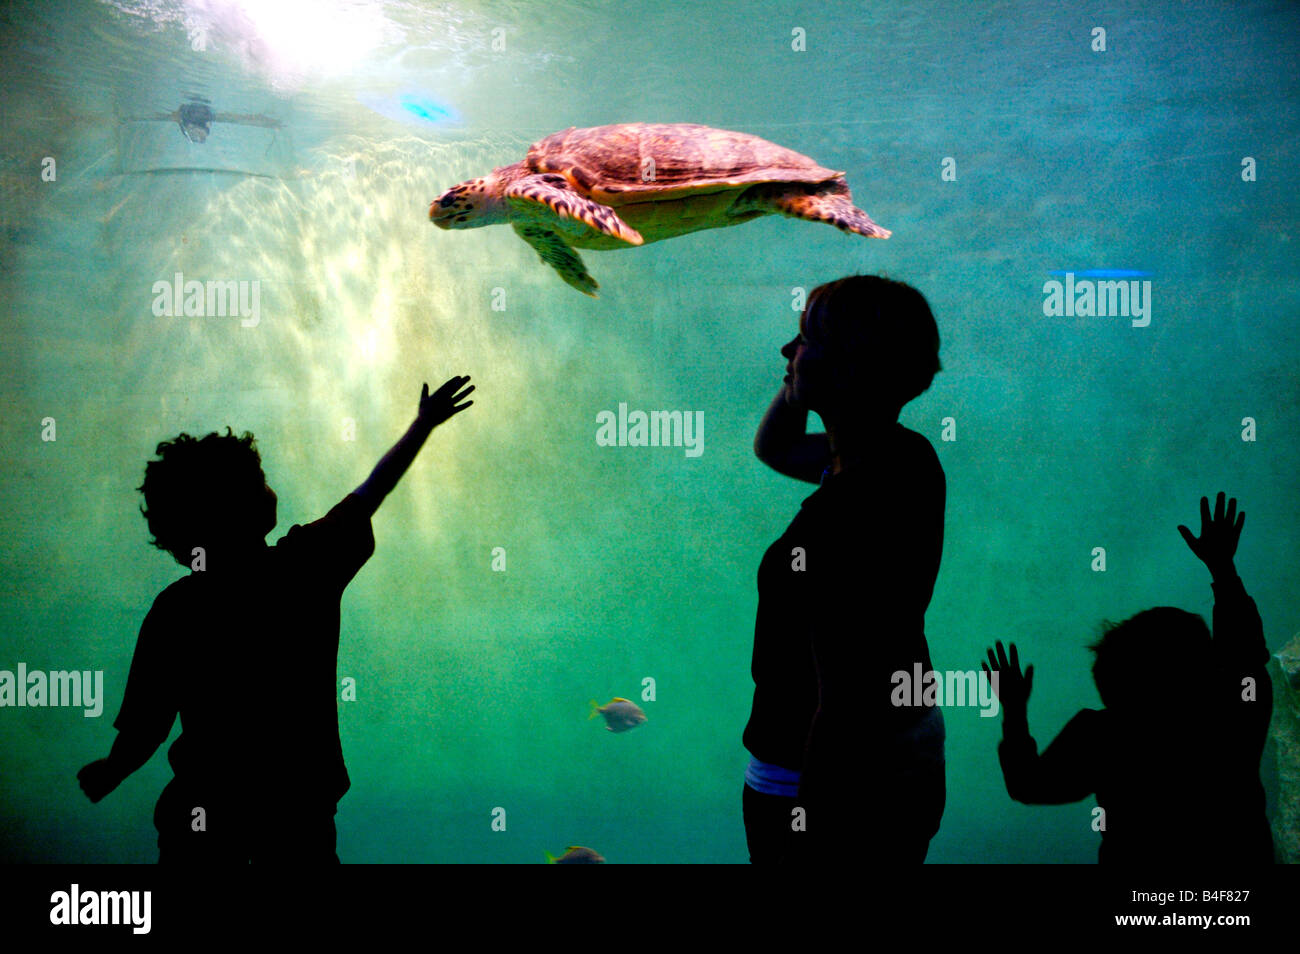 Children watching a turtle swimming in an Aquarium, France Stock Photo